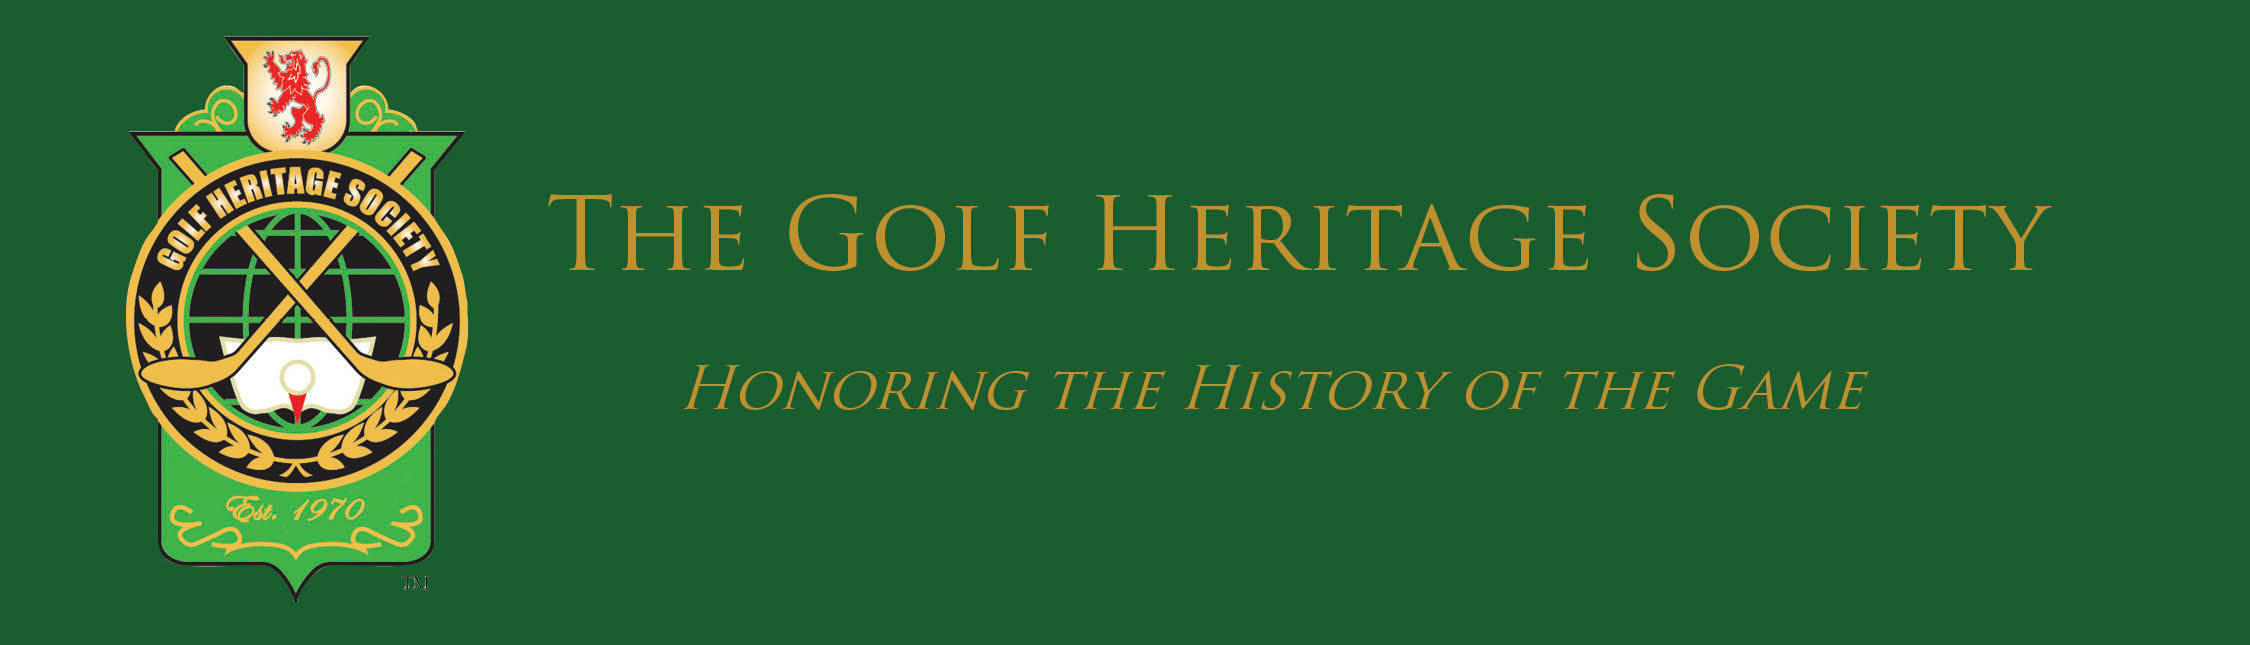 The Golf Heritage Society Announces Special Membership Fee